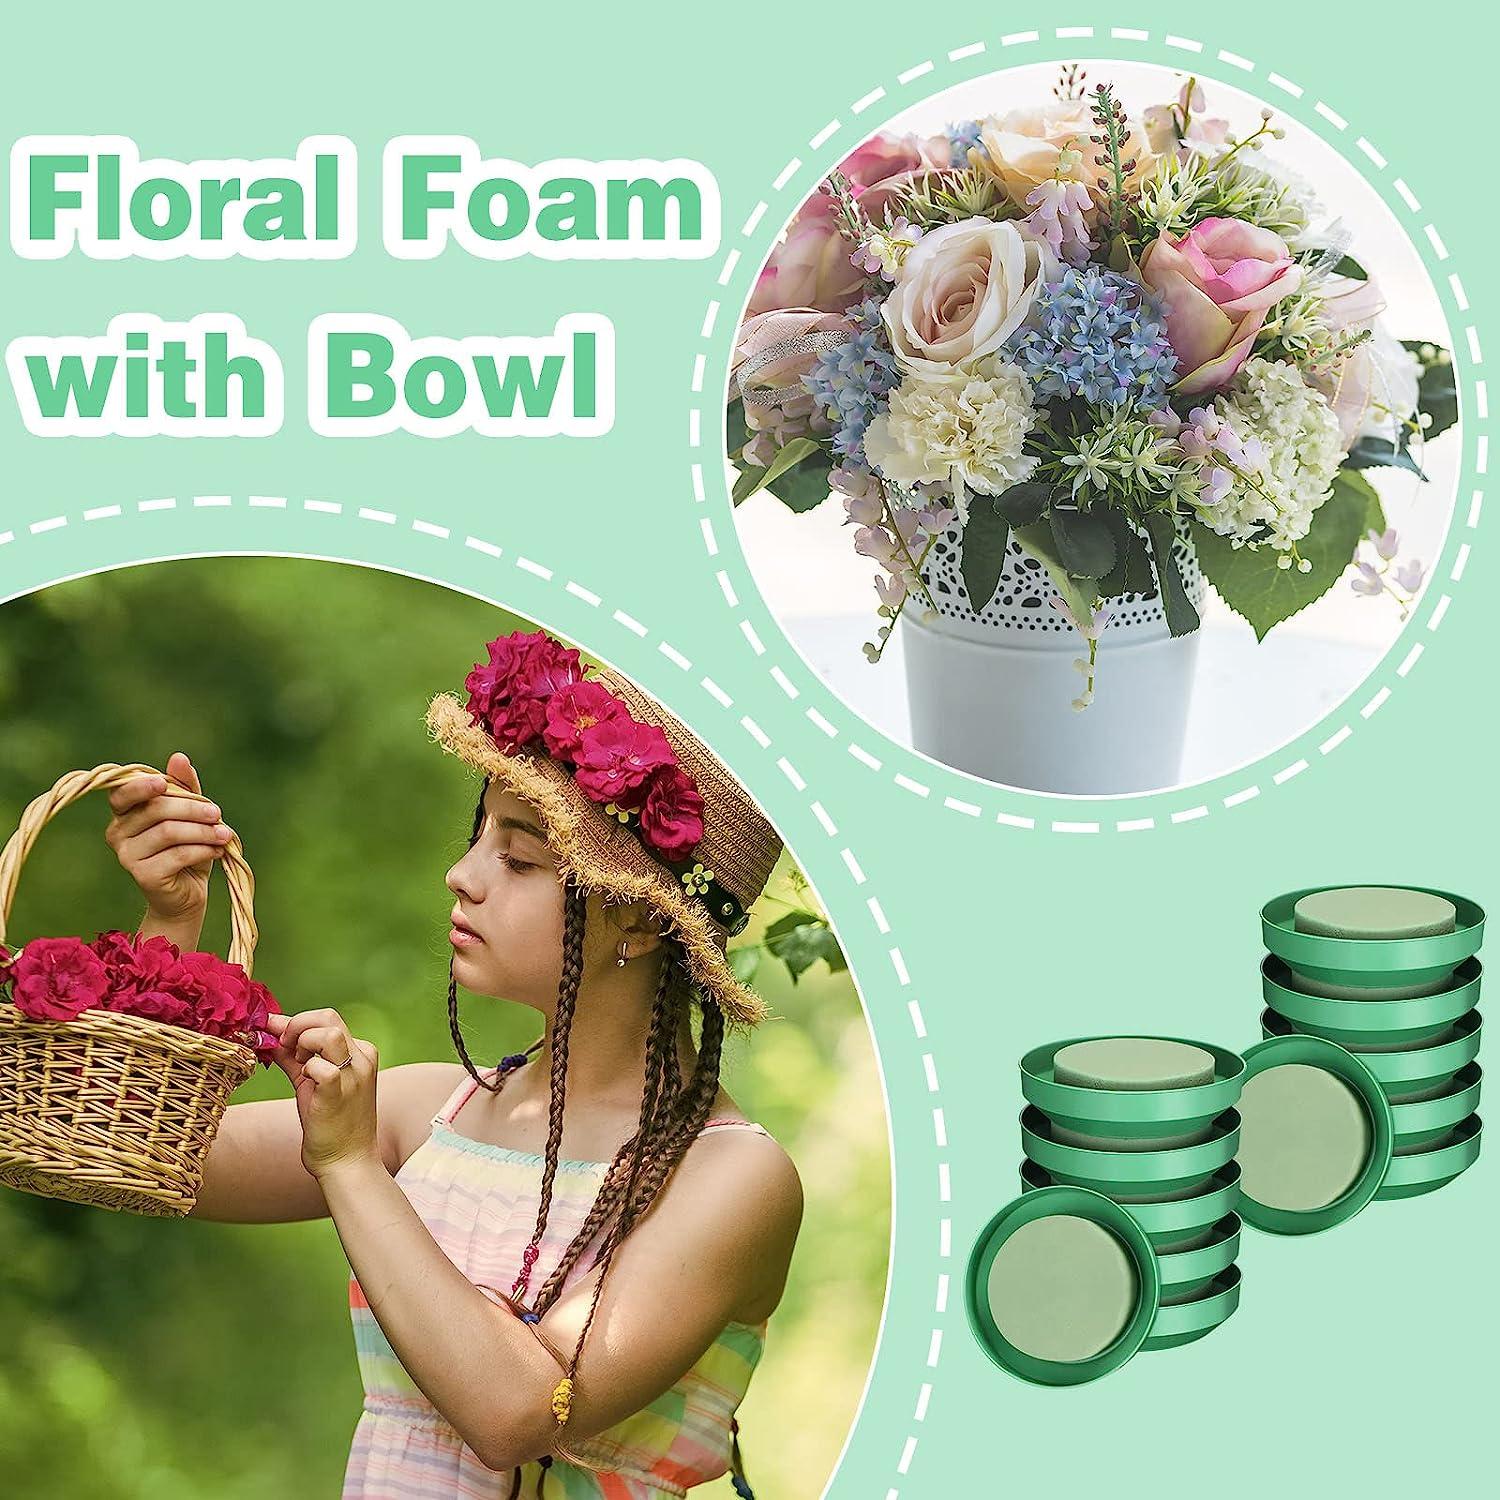 Perthlin 12 Pieces DIY Flower Foam with Bowl Kit 6.5 Inch Large Size Round  Floral Foam Blocks Green DIY Flower Arrangement Kit Floral Flower Arranging  Supplies for Wedding Birthday Party Decoration